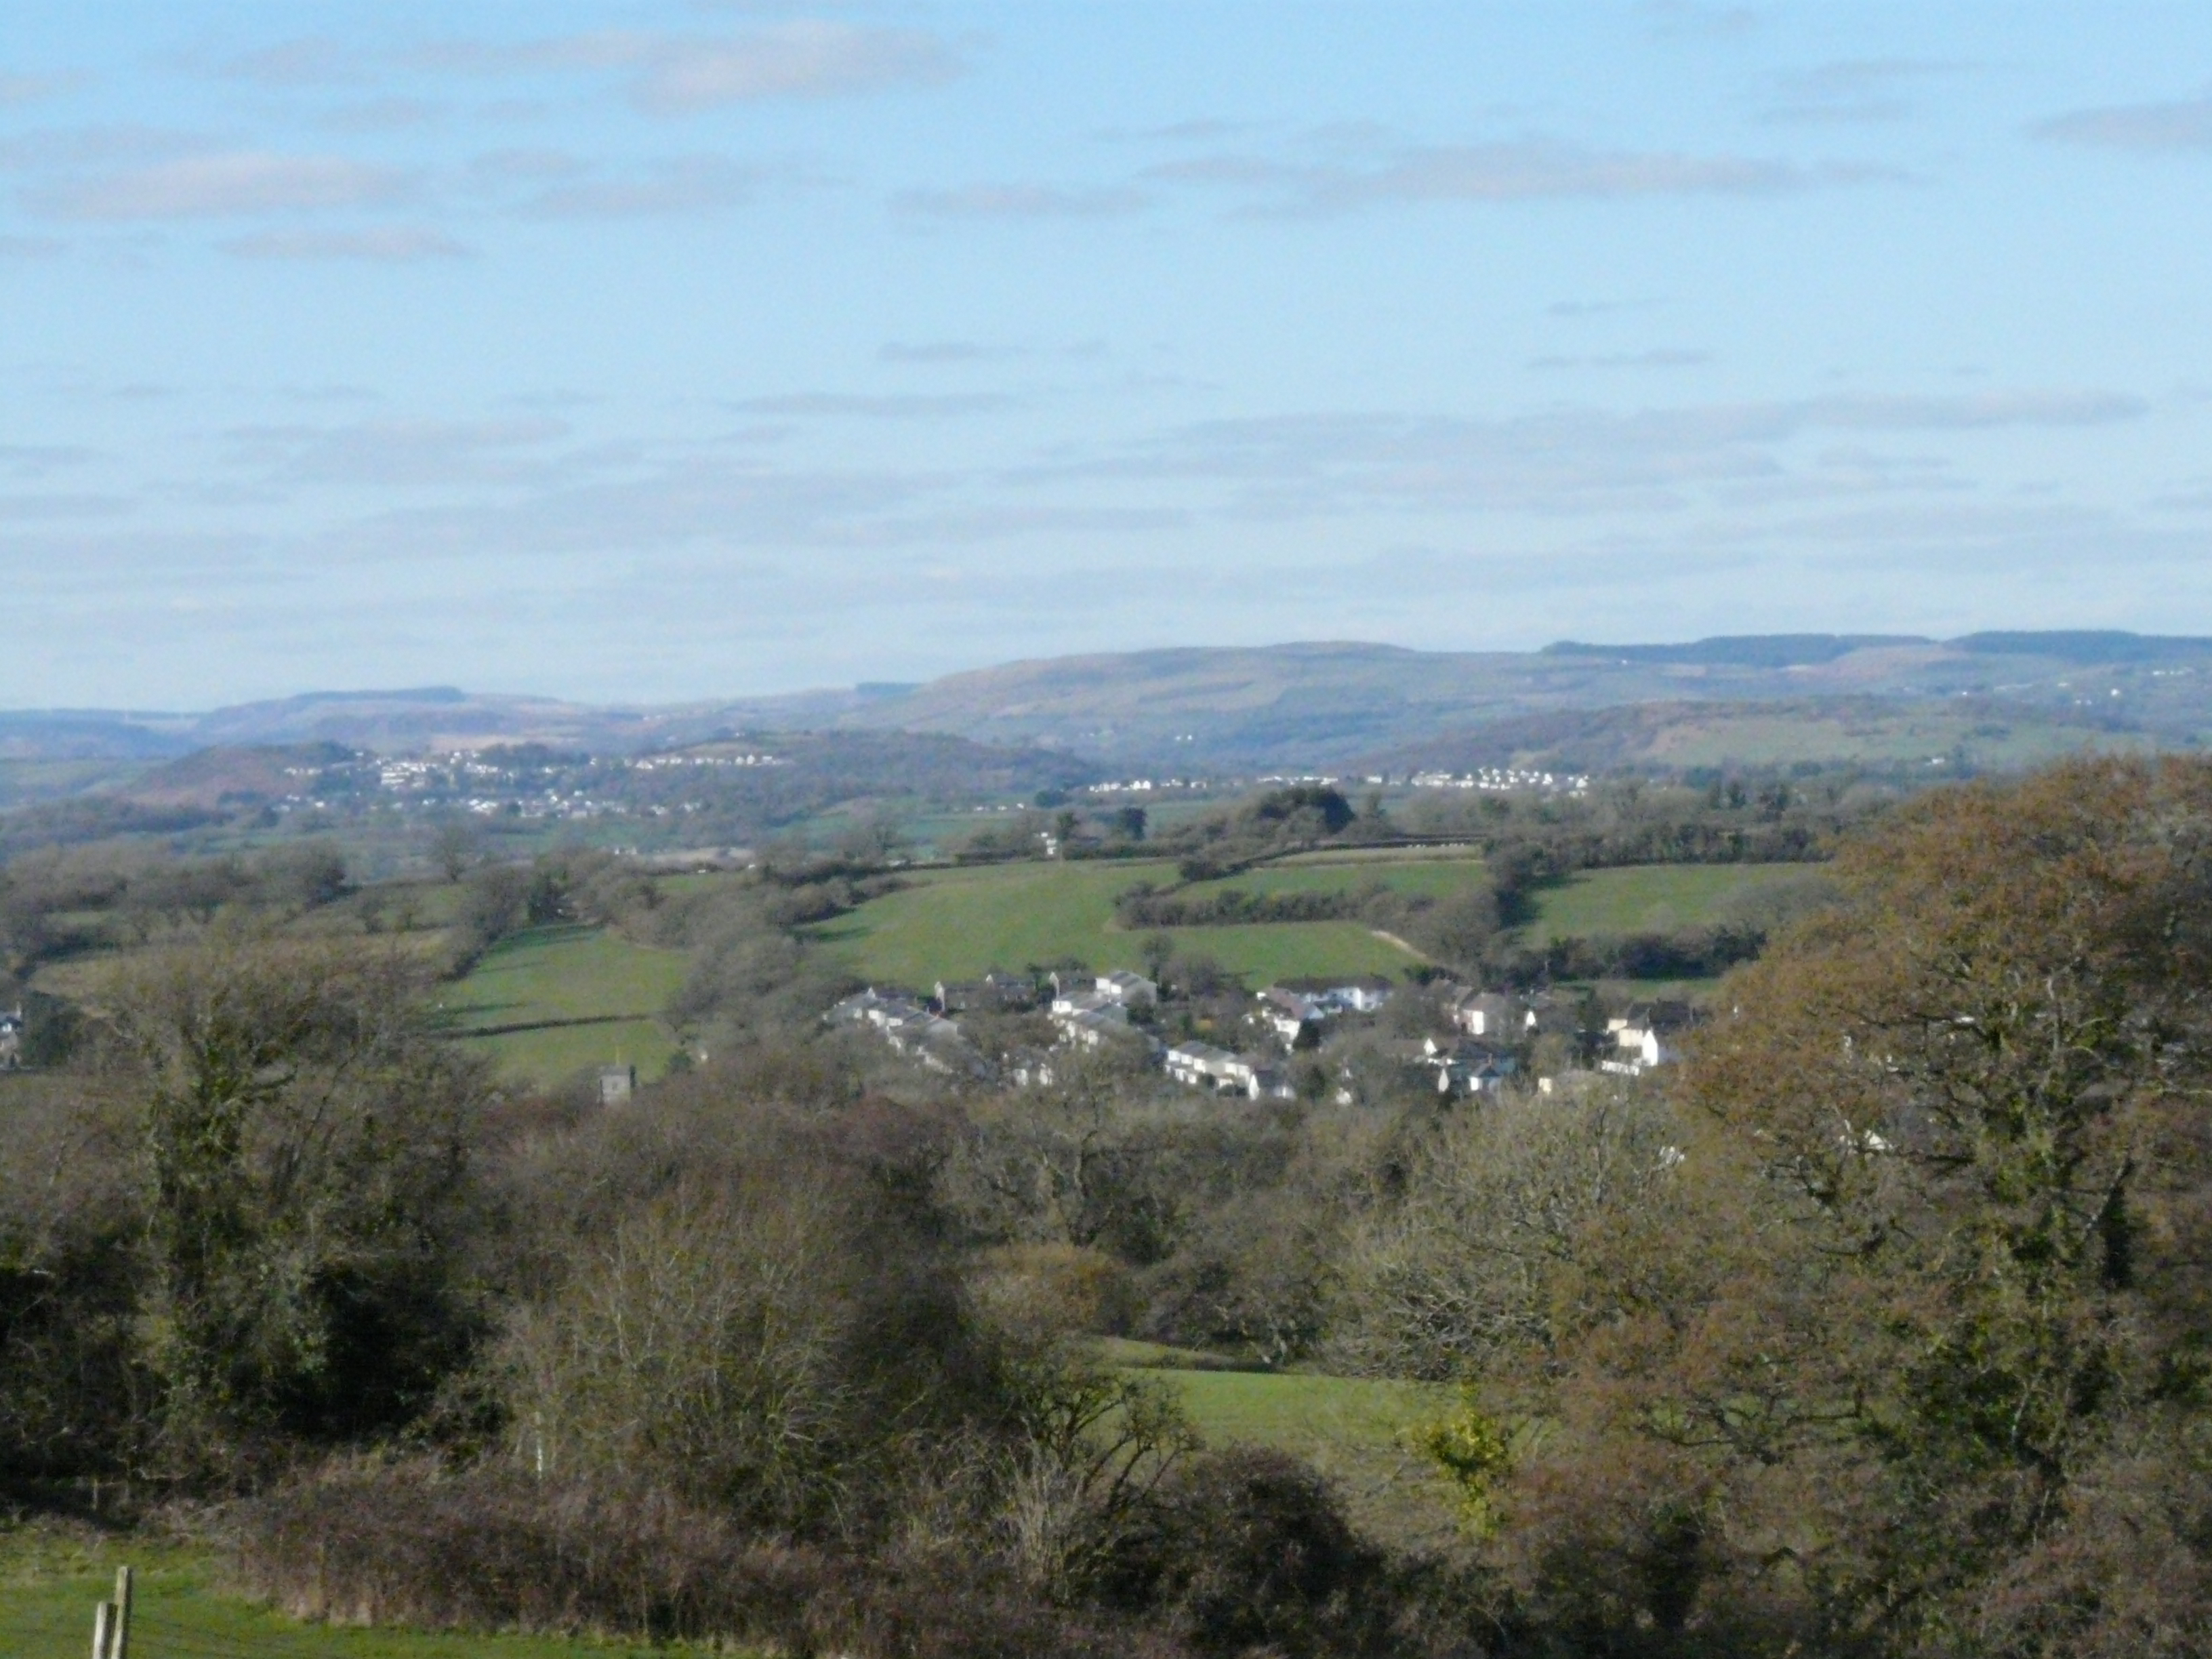 Peterston with Llantrisant in the distance